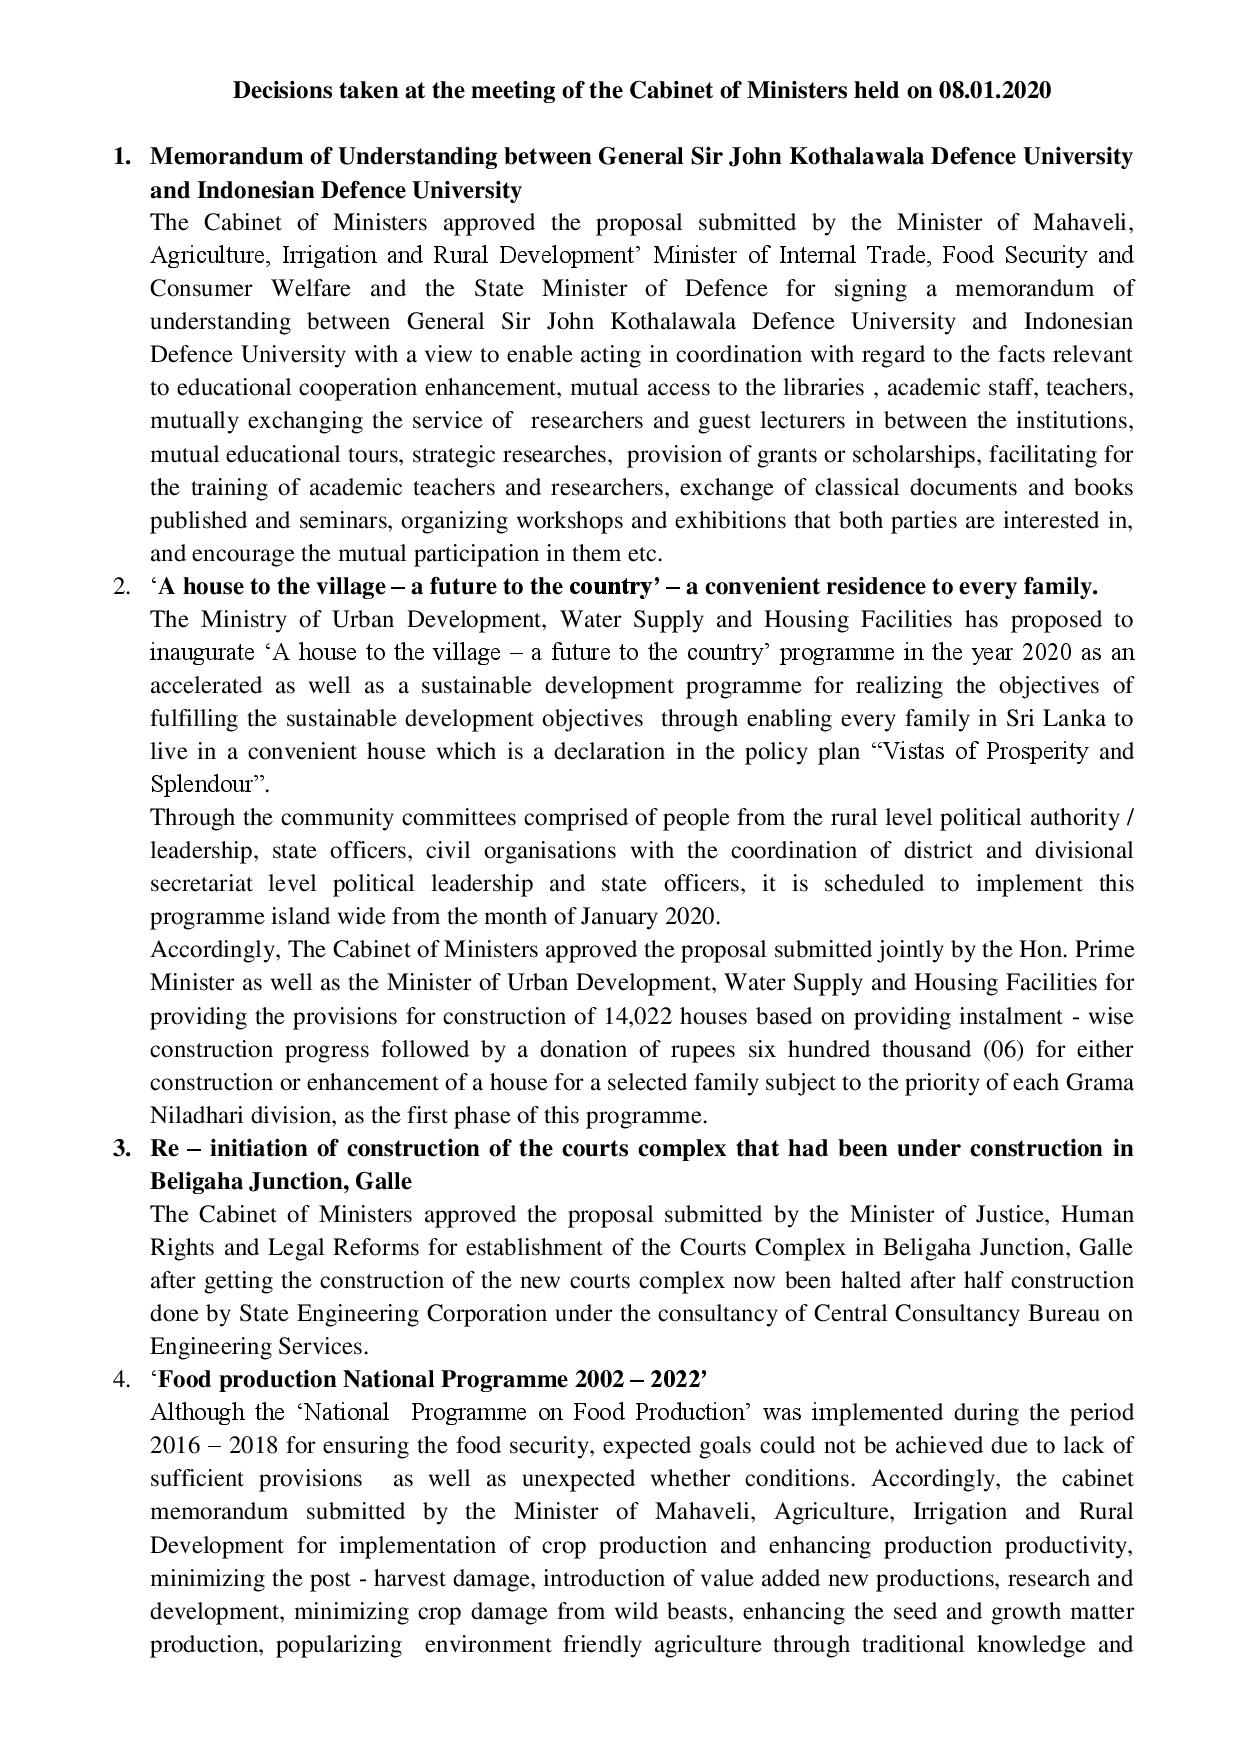 1 EDecisions taken at the meeting of the Cabinet of Ministers held on 08.01.2020 5 page 001